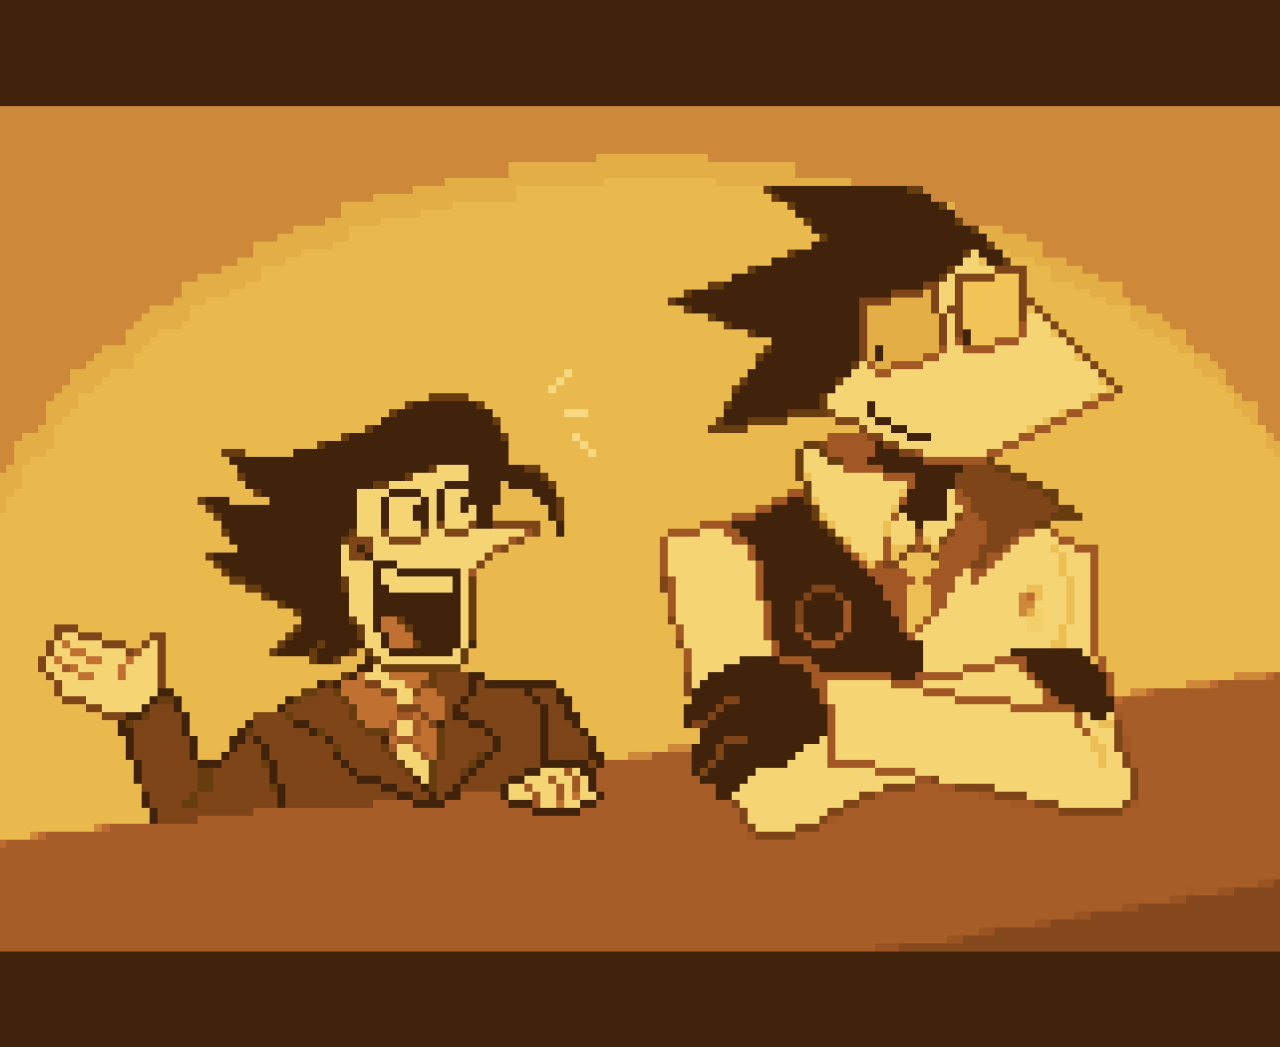 shortly after closing time at the Color Cafe..... circa ‘97?? #swatchton#spamton#swatch#deltarune fanart#my art#pixel art